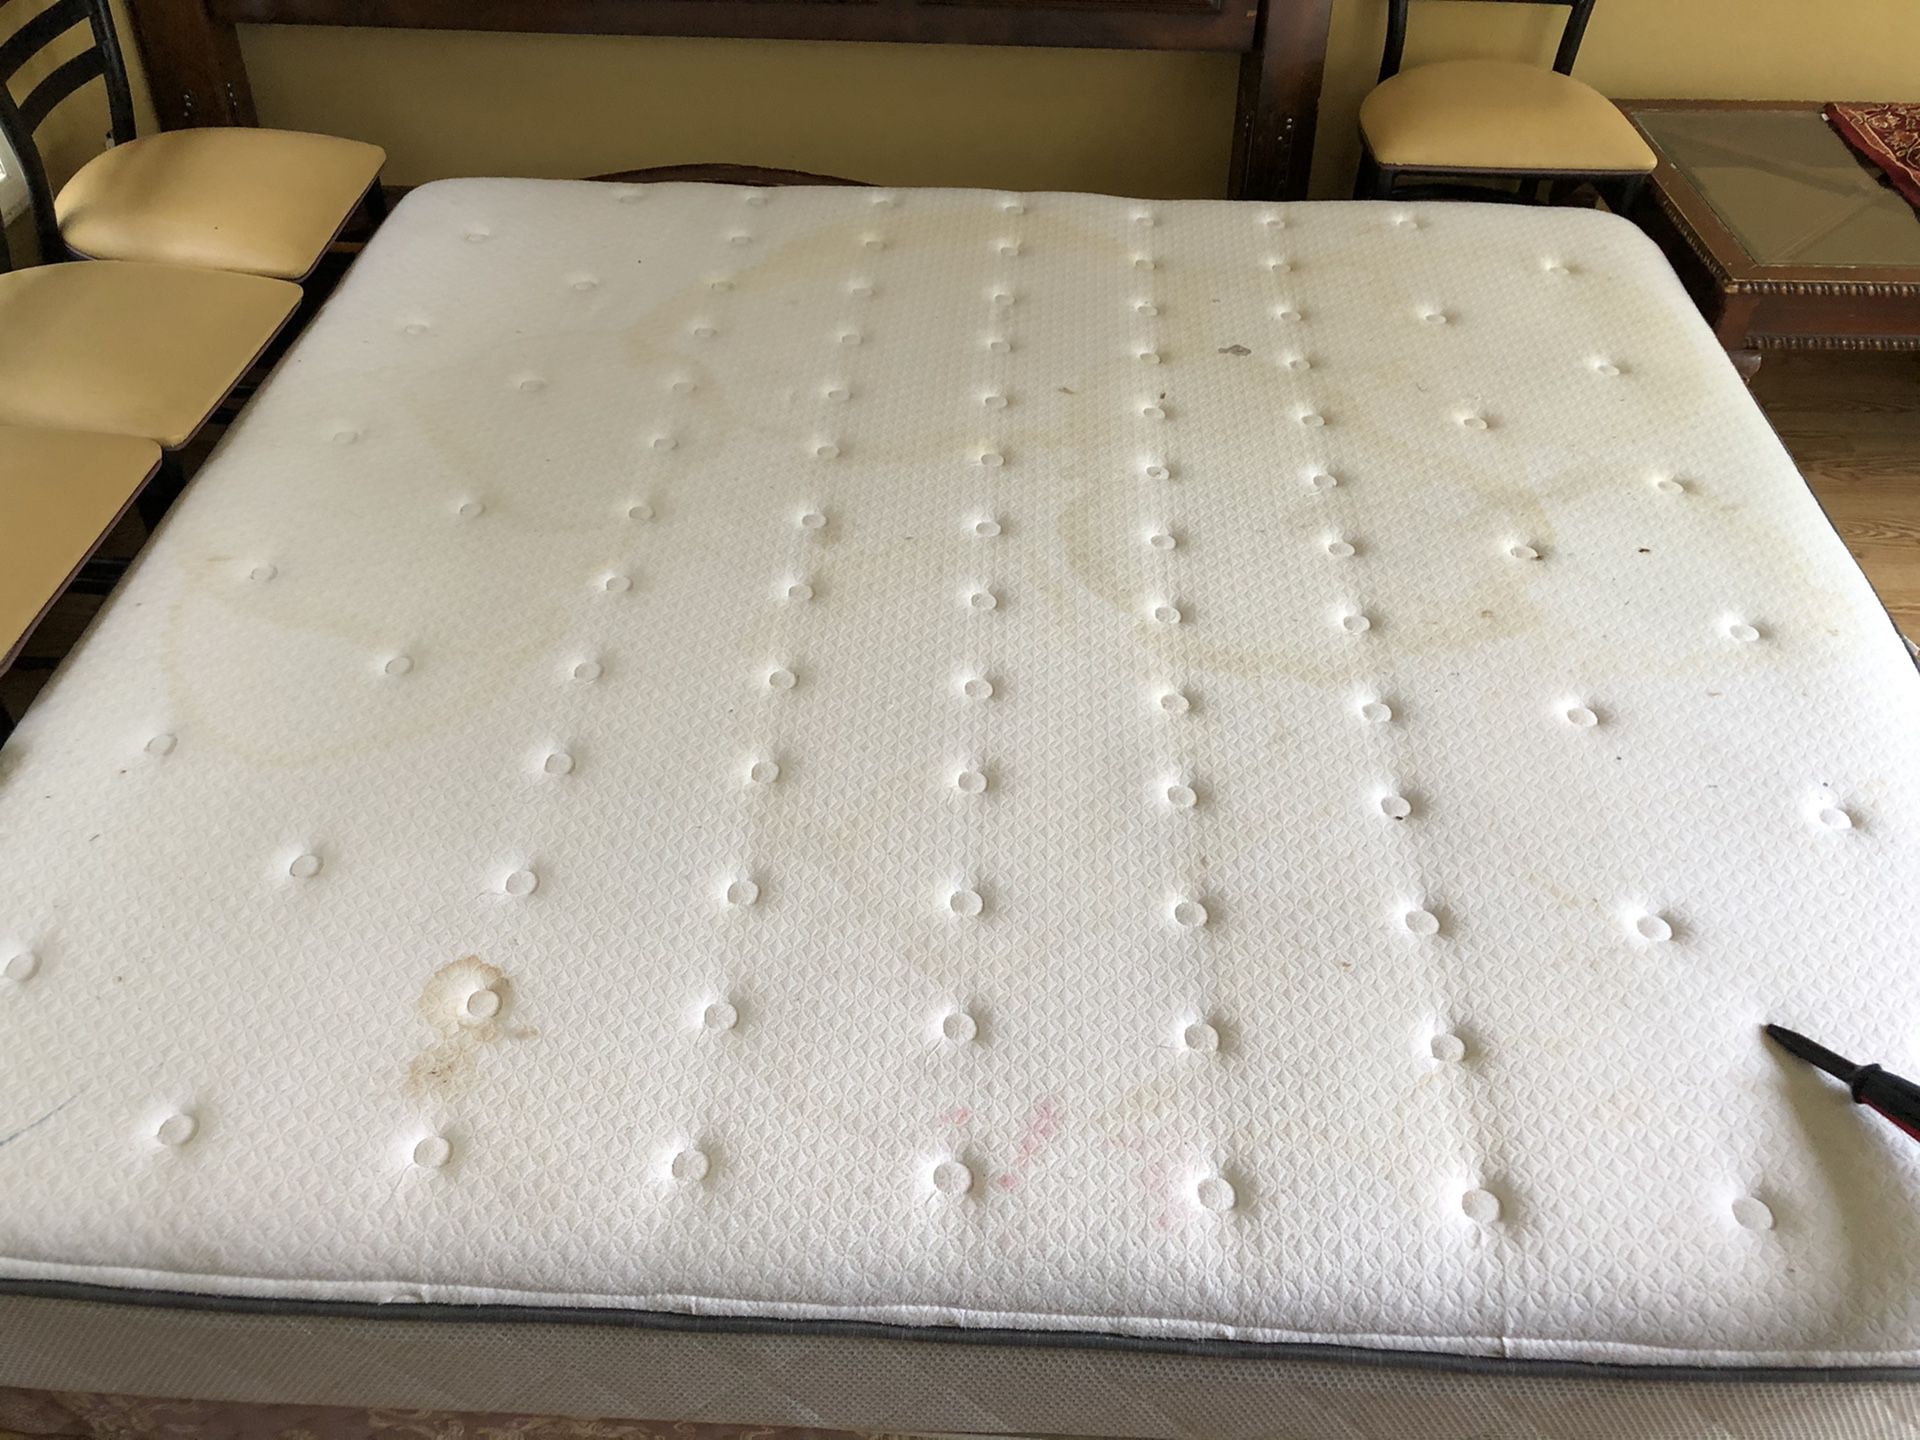 Kind size bed frame and mattress.